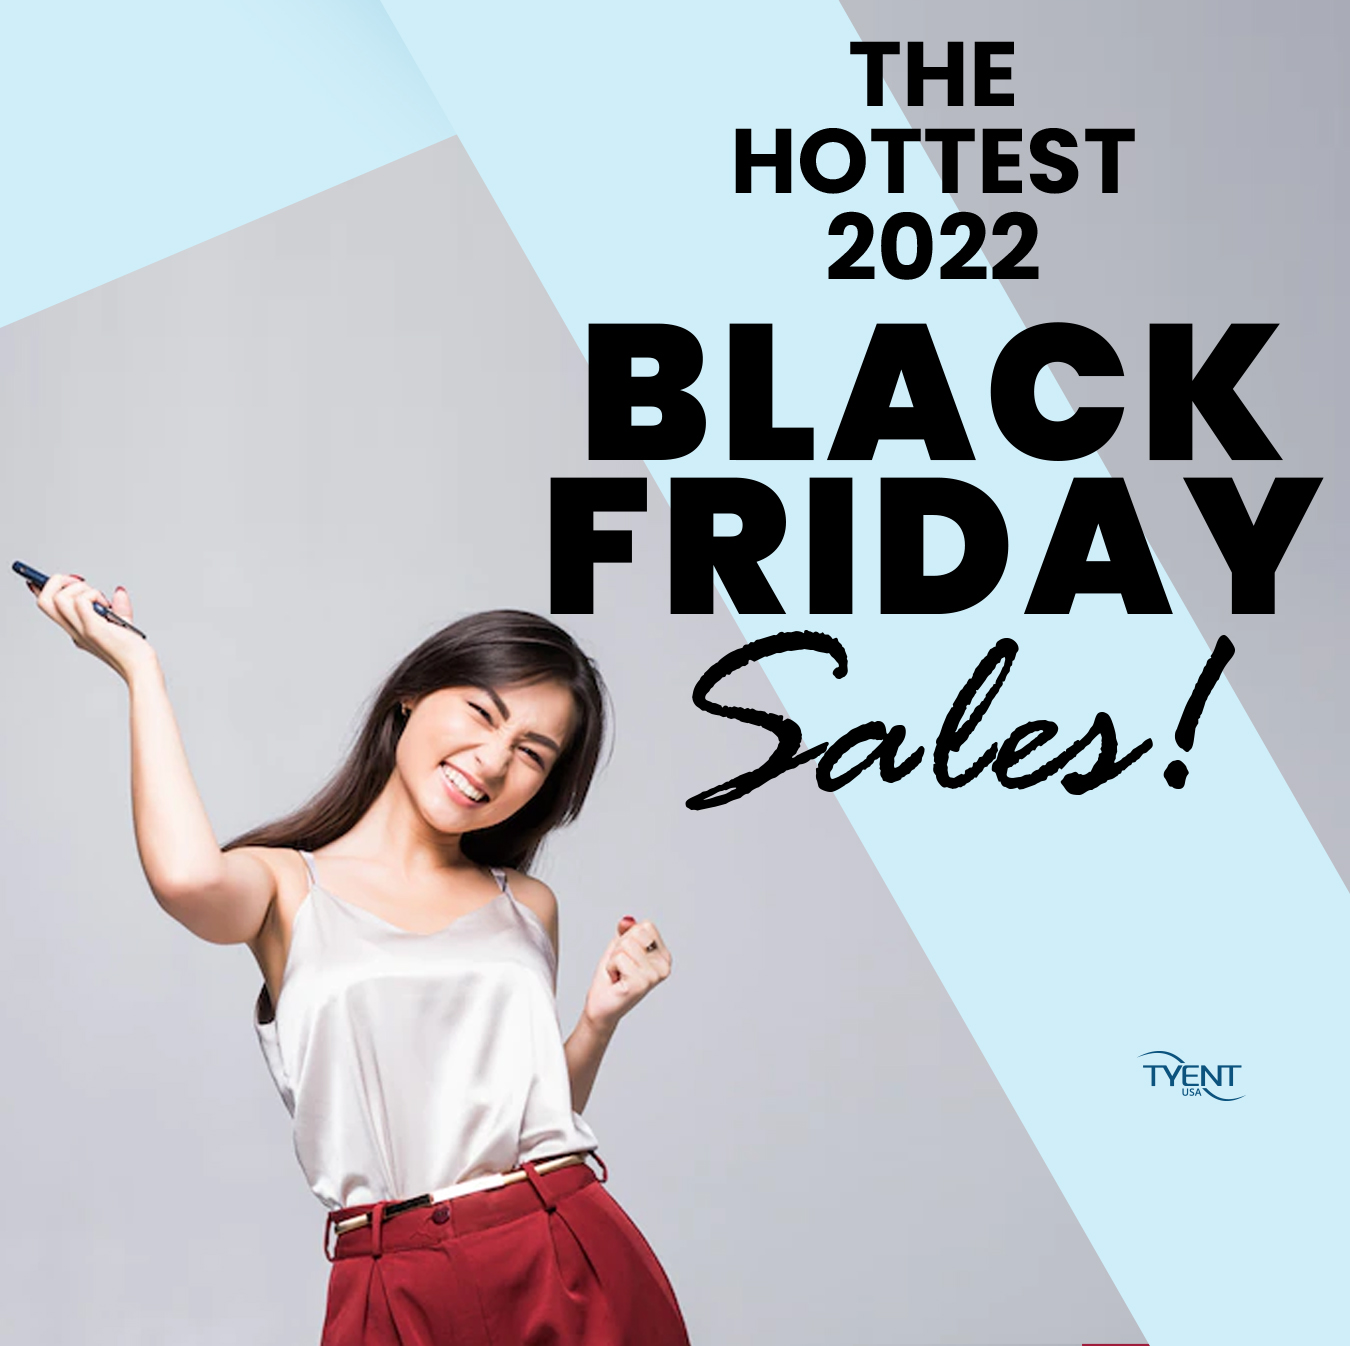 The Hottest 2022 Black Friday Sales